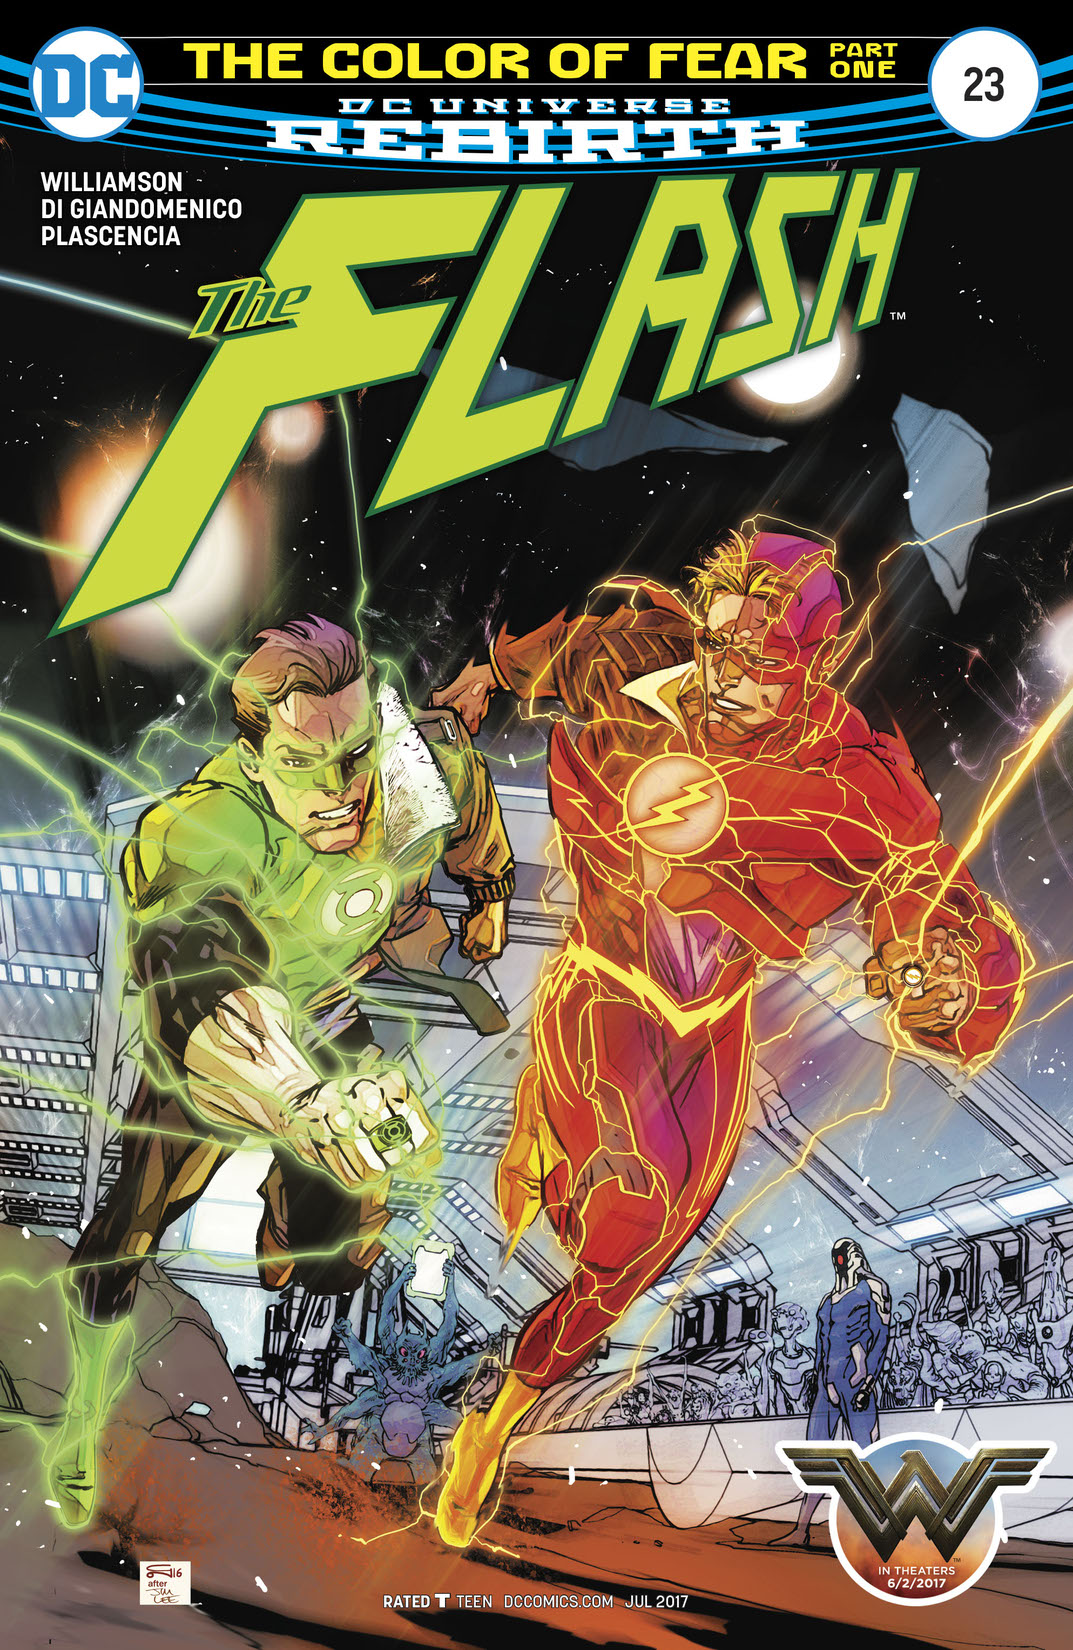 The Flash (2016-) #23 preview images